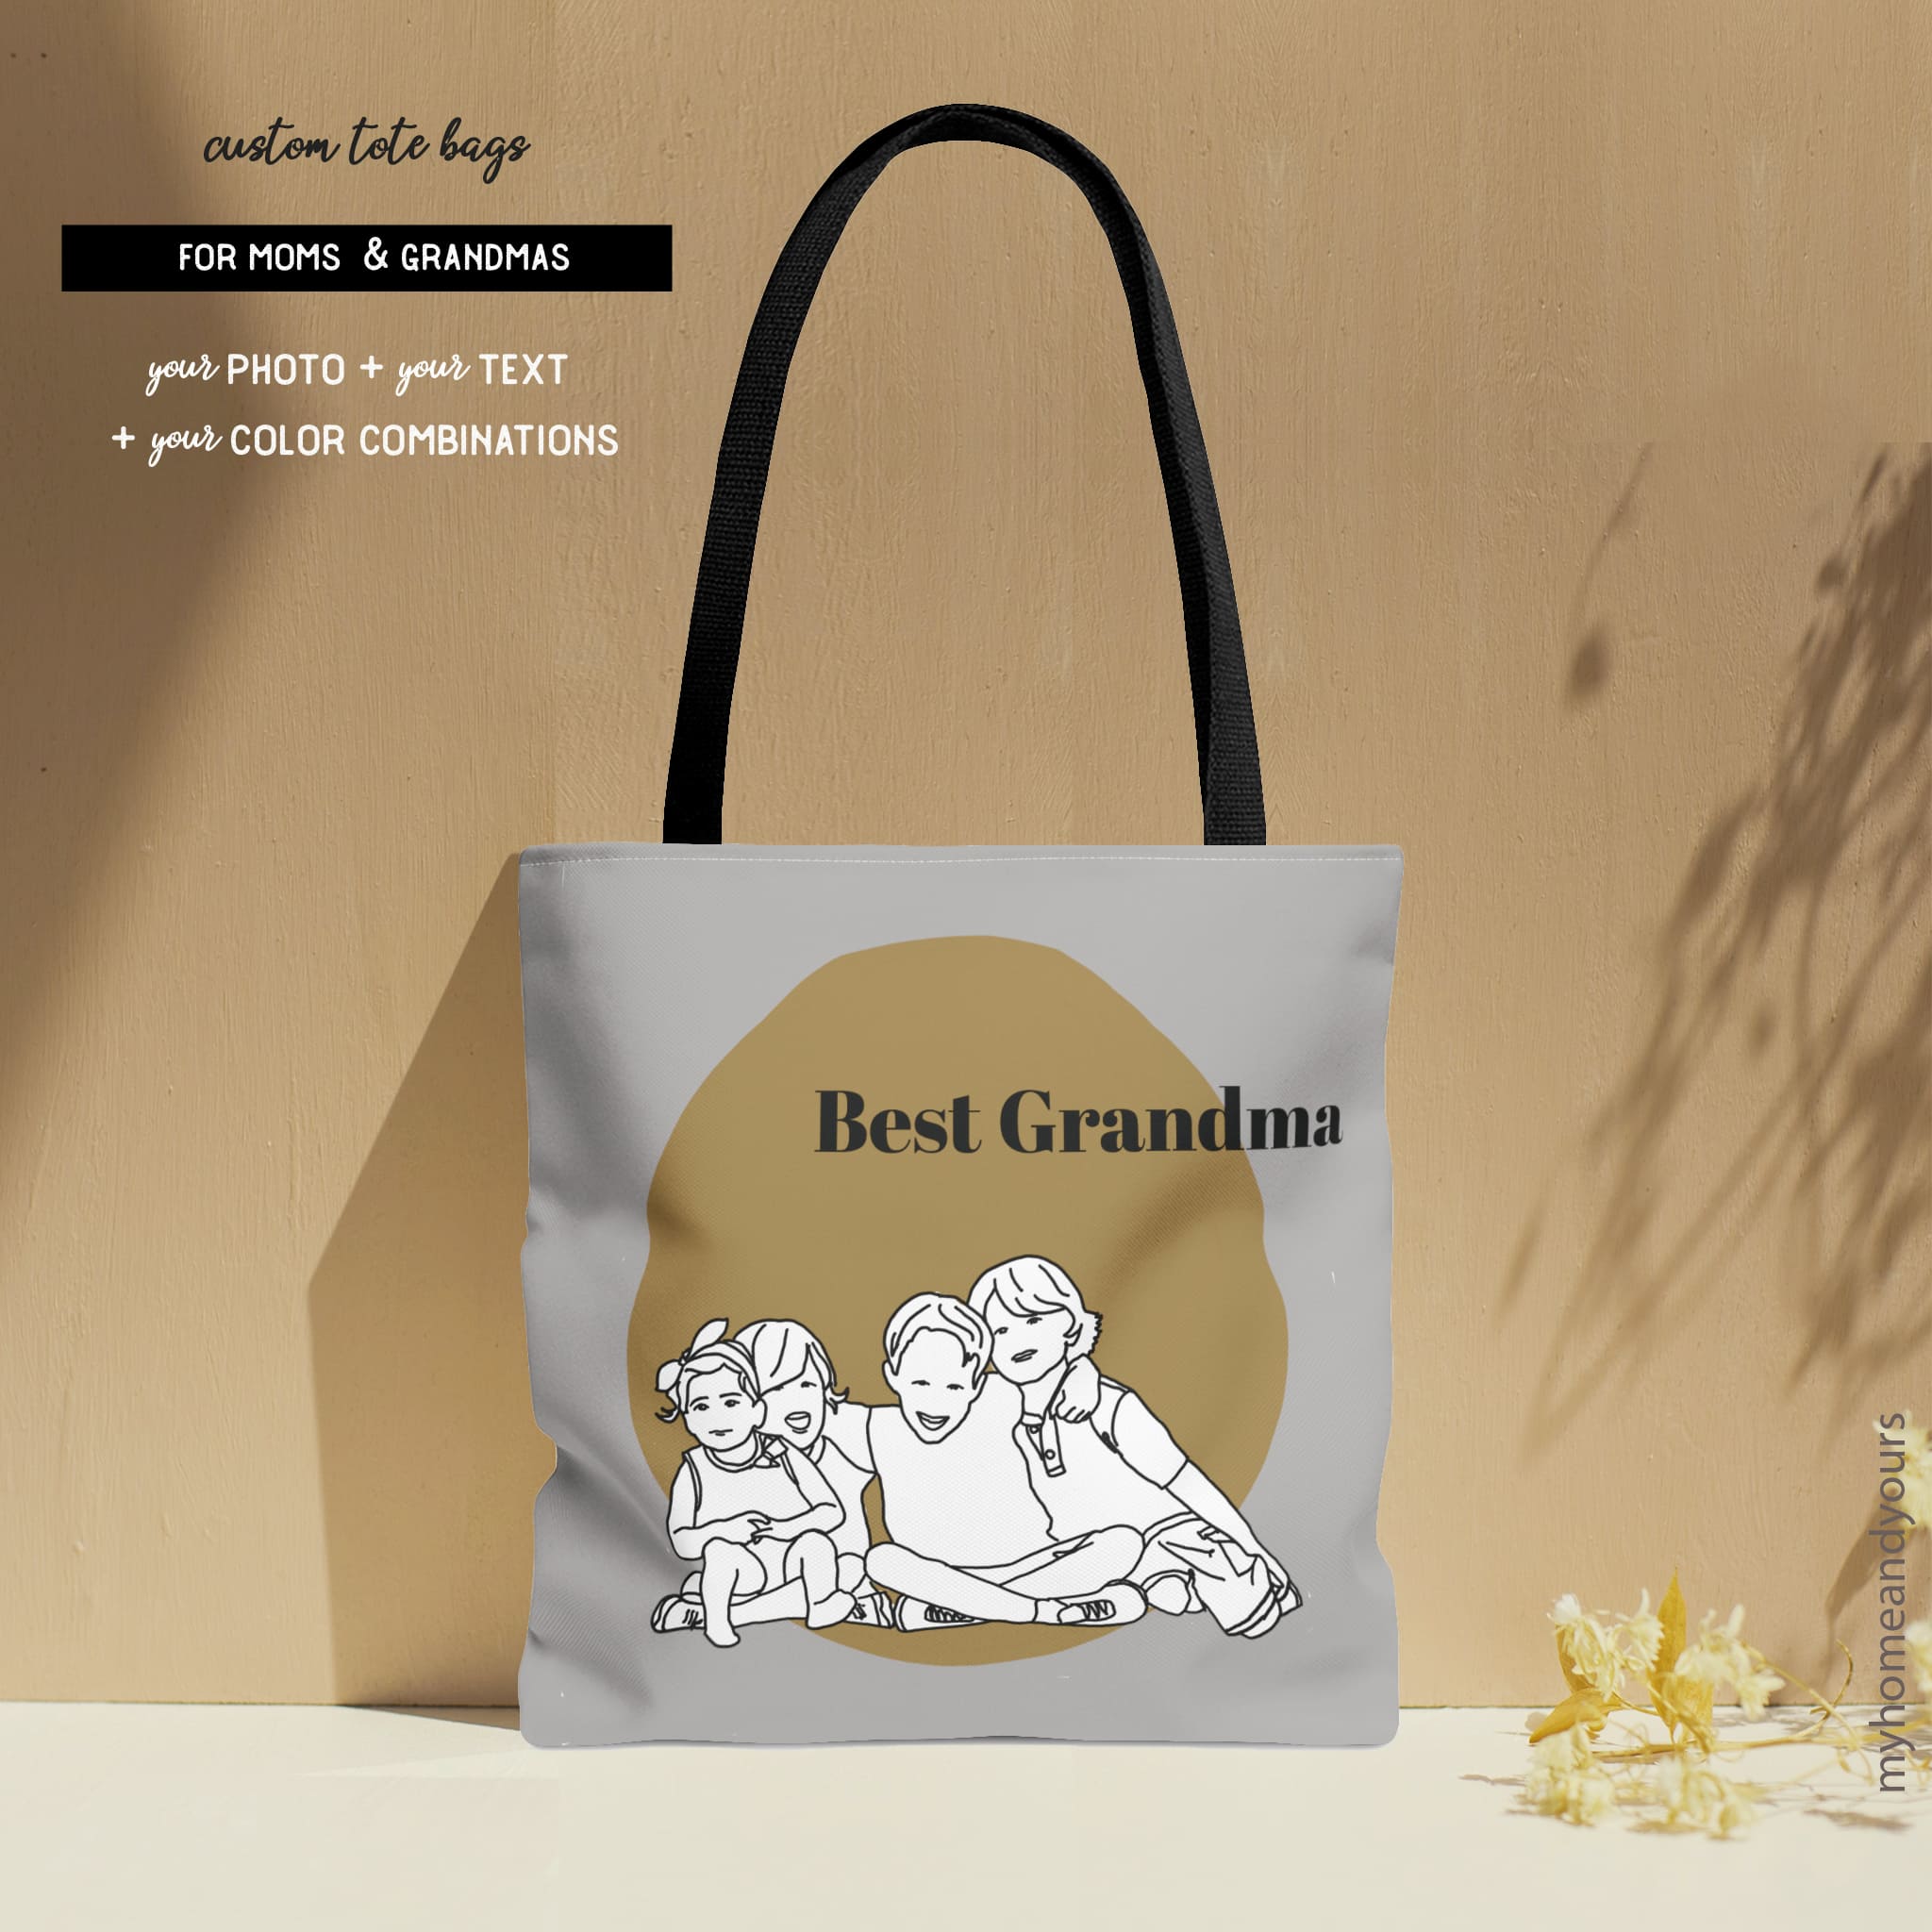 Fashionable custom tote bag for the best grandma with line portrait of the grandchildren